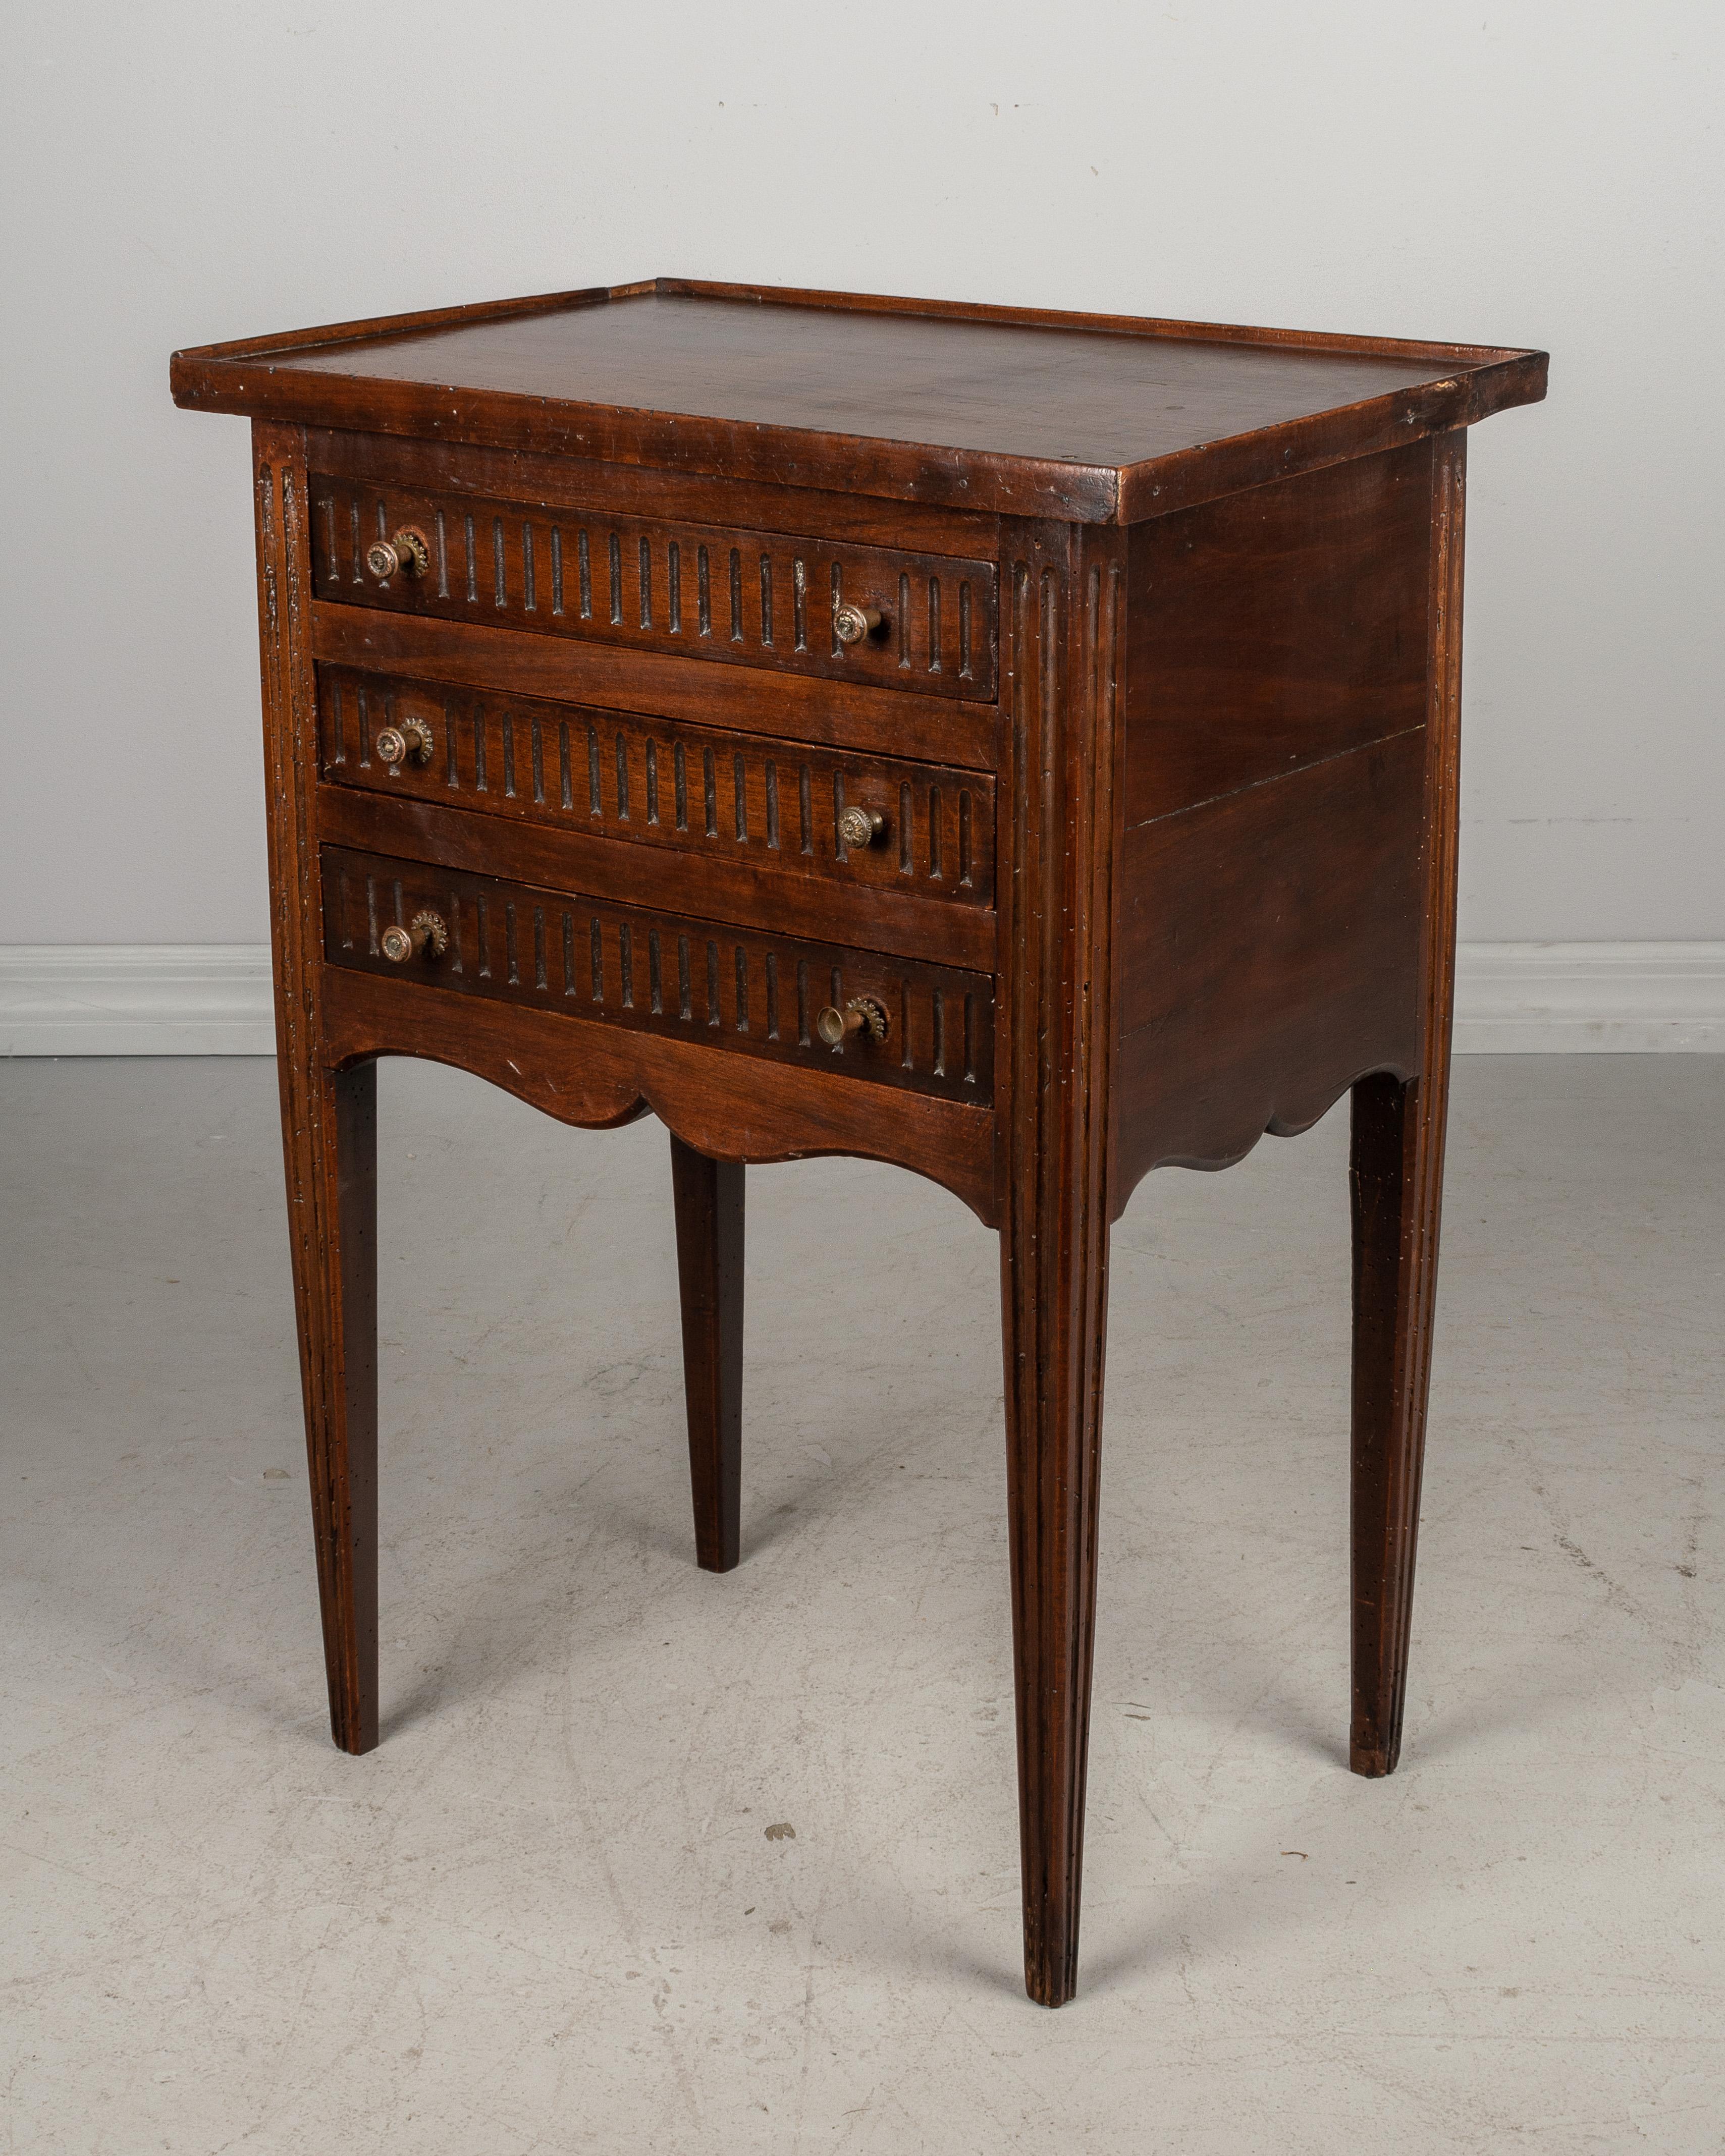 A 19th century French Louis XVI style side table made of walnut. Nice proportions with slender legs. Three dovetailed drawers with subtle carved detail. Original brass pulls are as found. Pegged construction. Minor repairs.
 